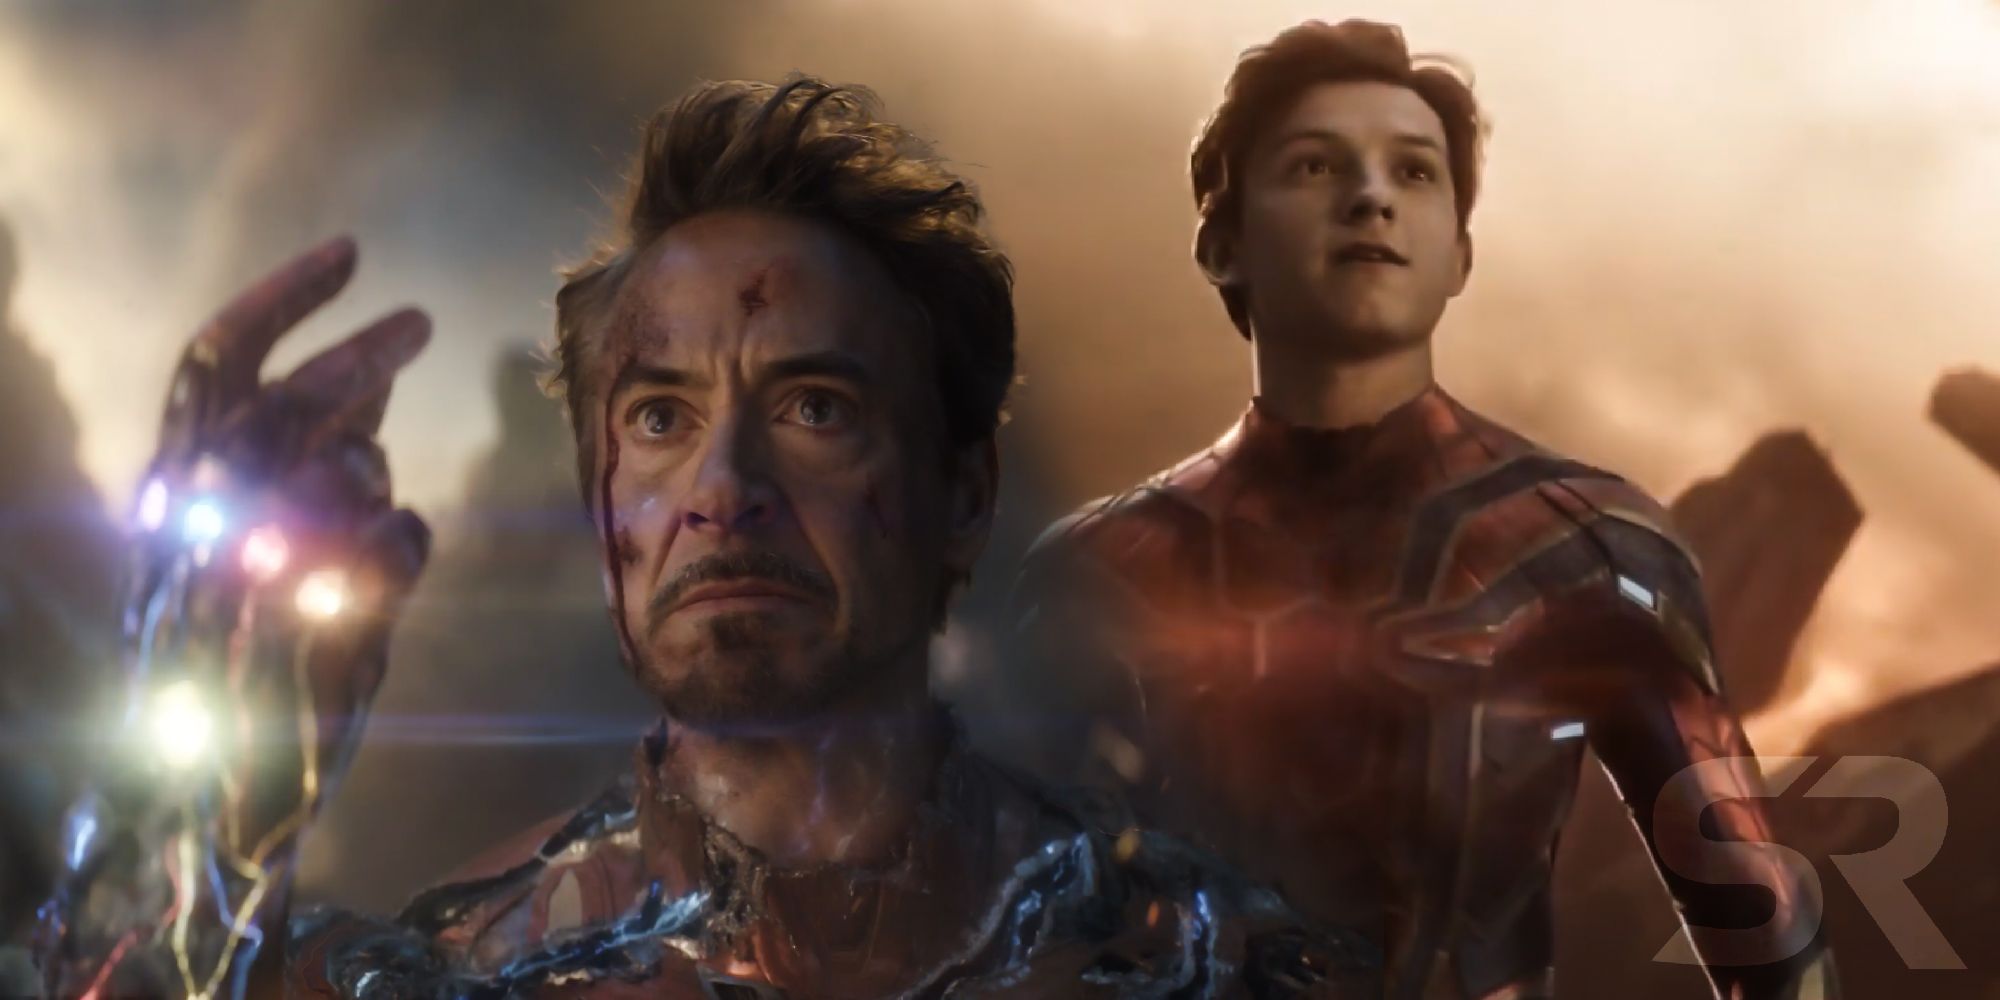 RDJ has sobering words for Tom Holland’s career and Spider-Man